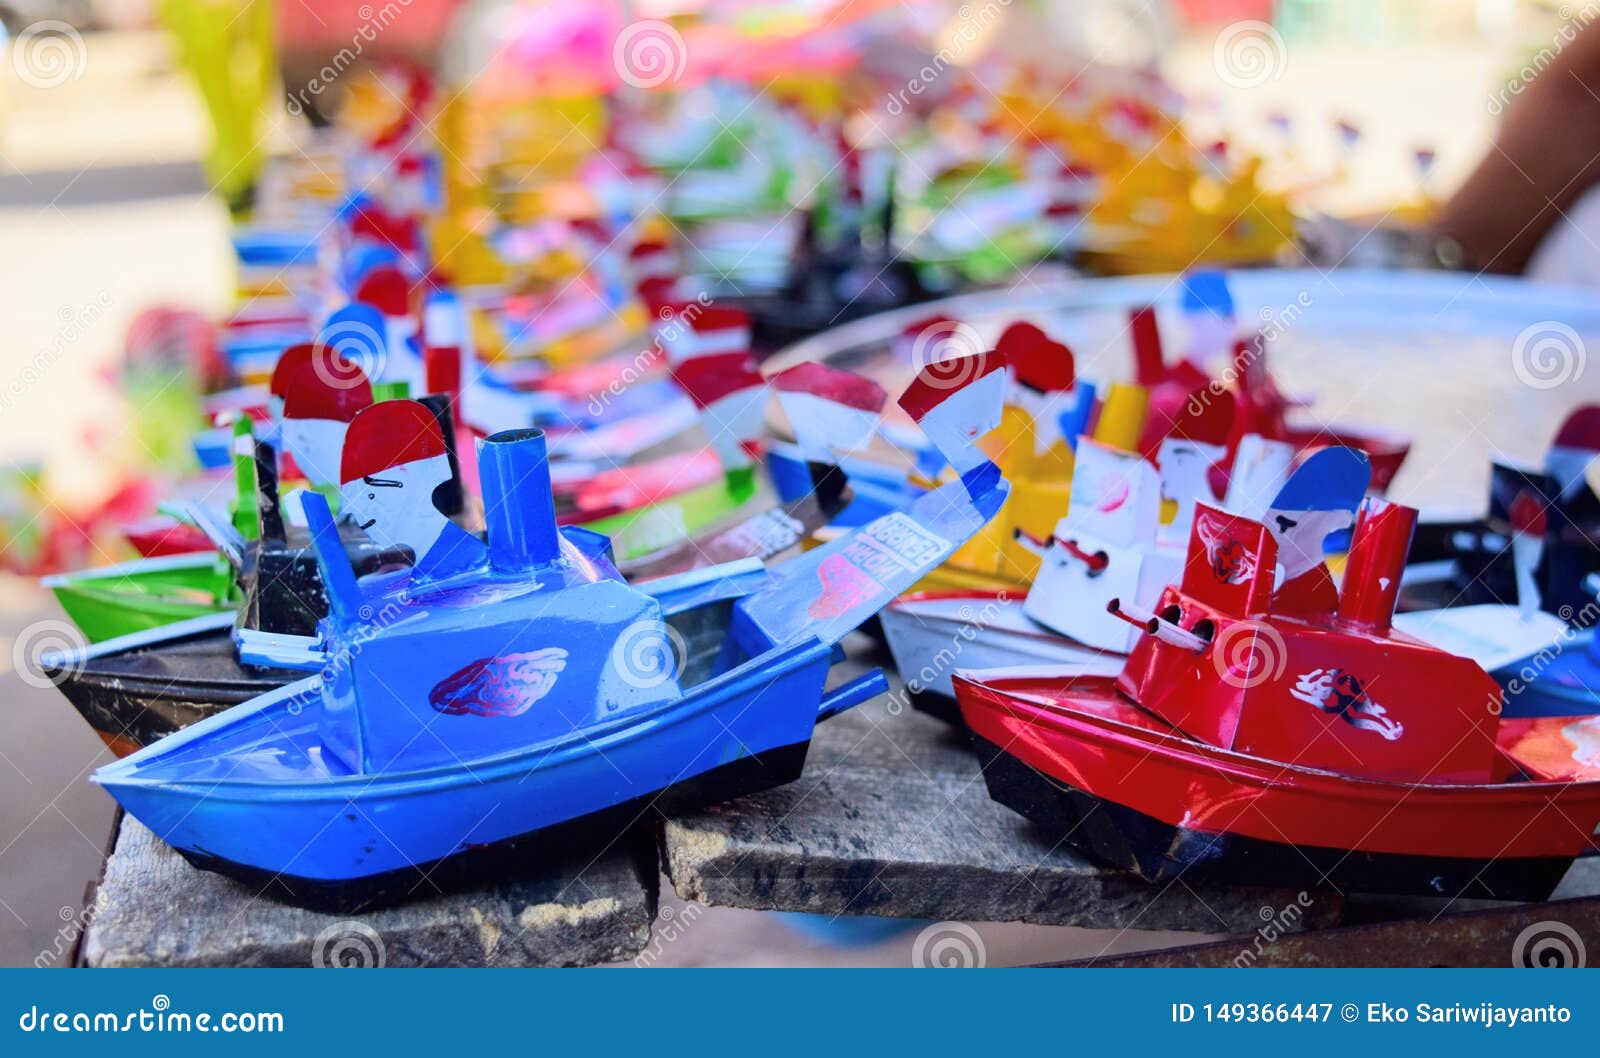  Toy  Boats Made Of Zinc Traditional Children s Toys  In 